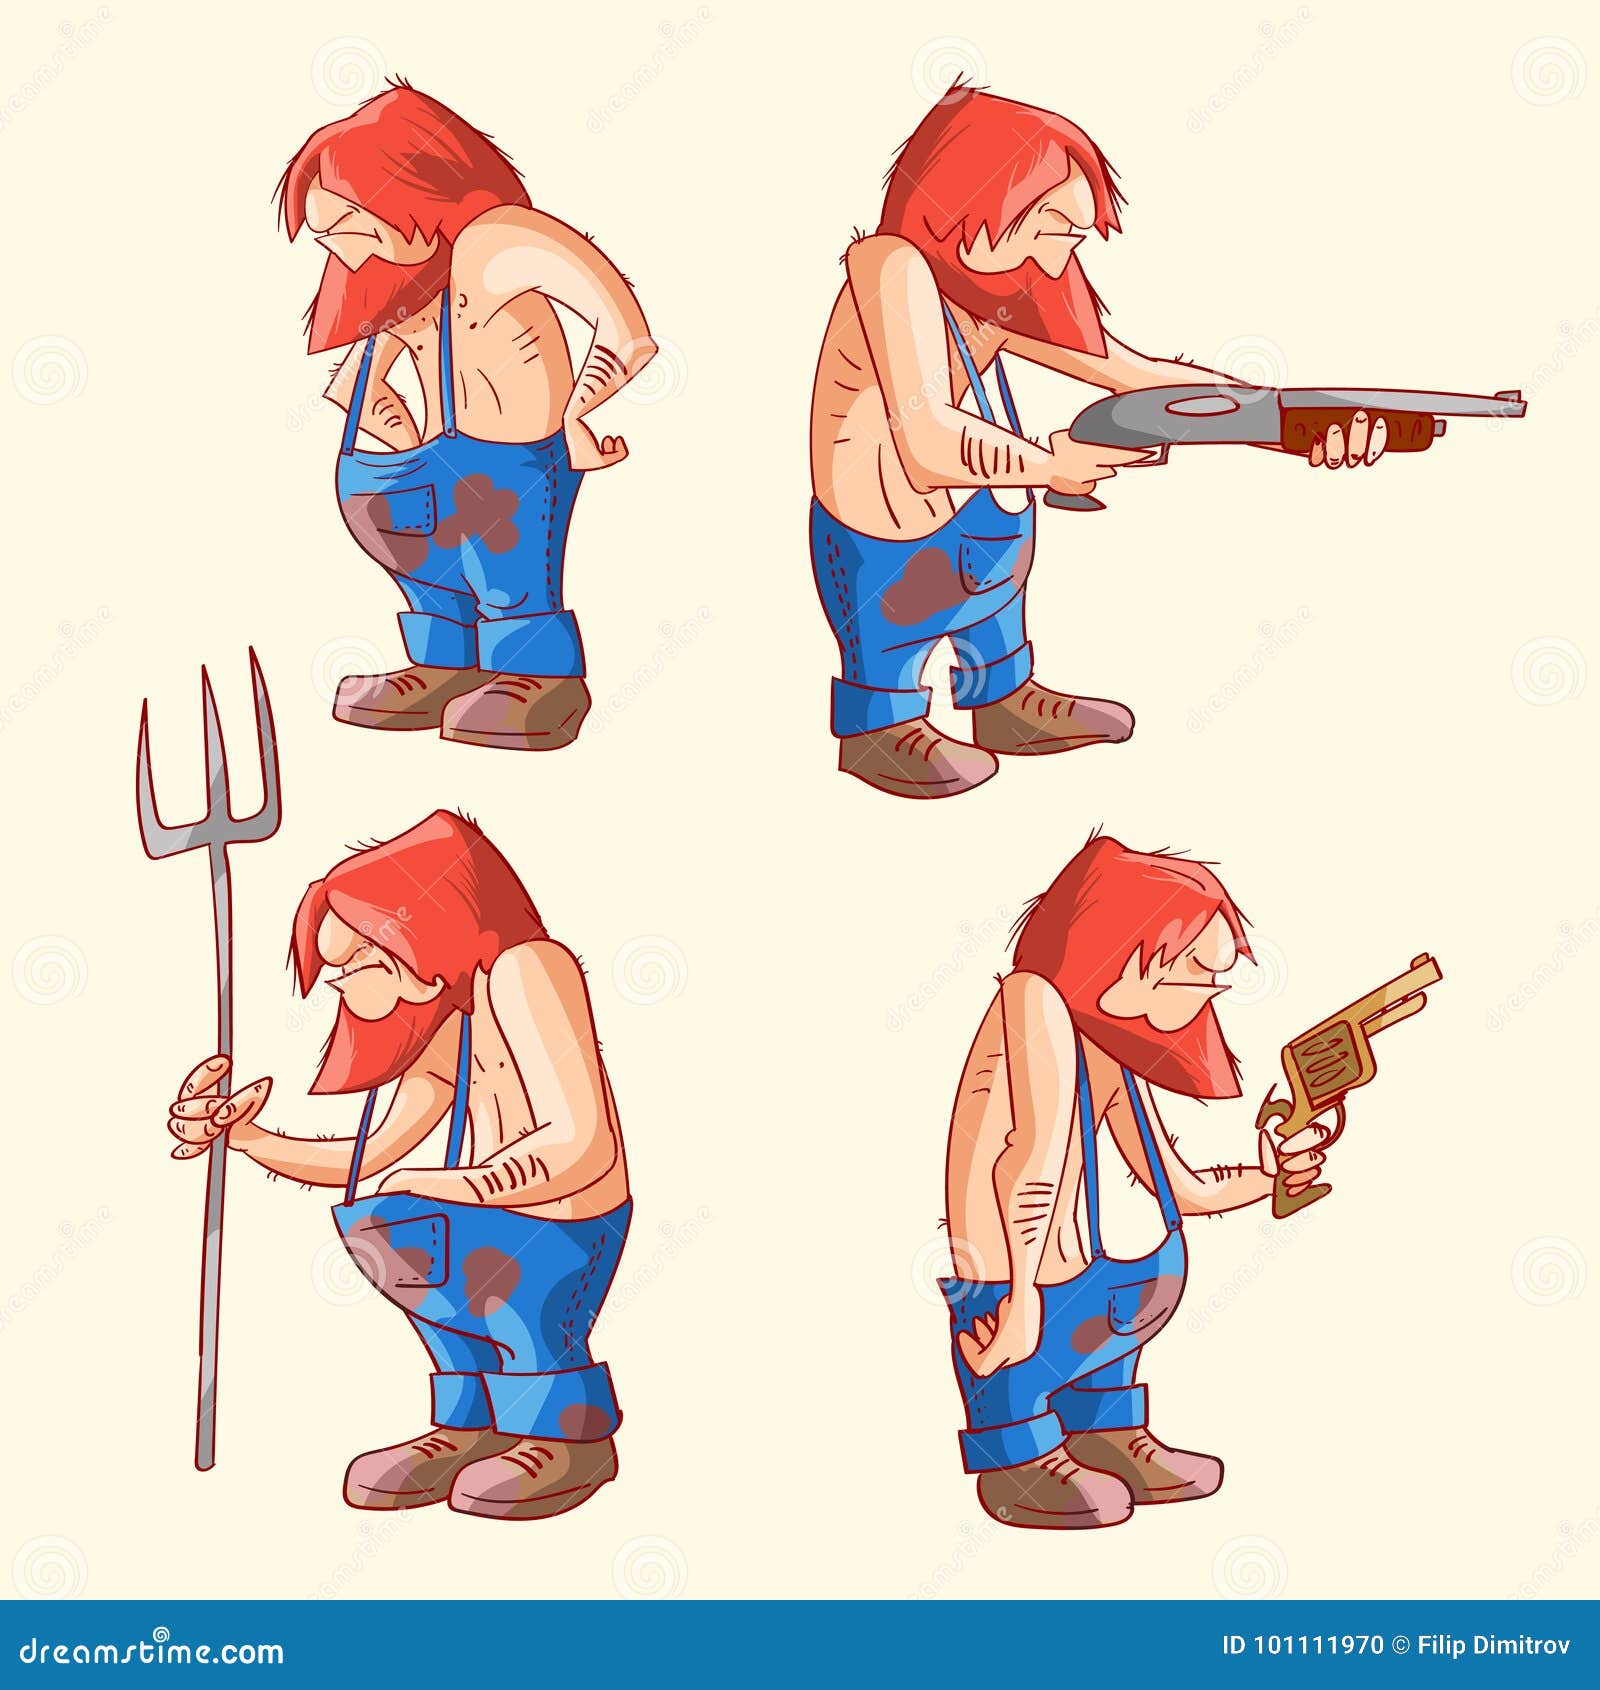 Rednecks Cartoons, Illustrations & Vector Stock Images - 13 Pictures to